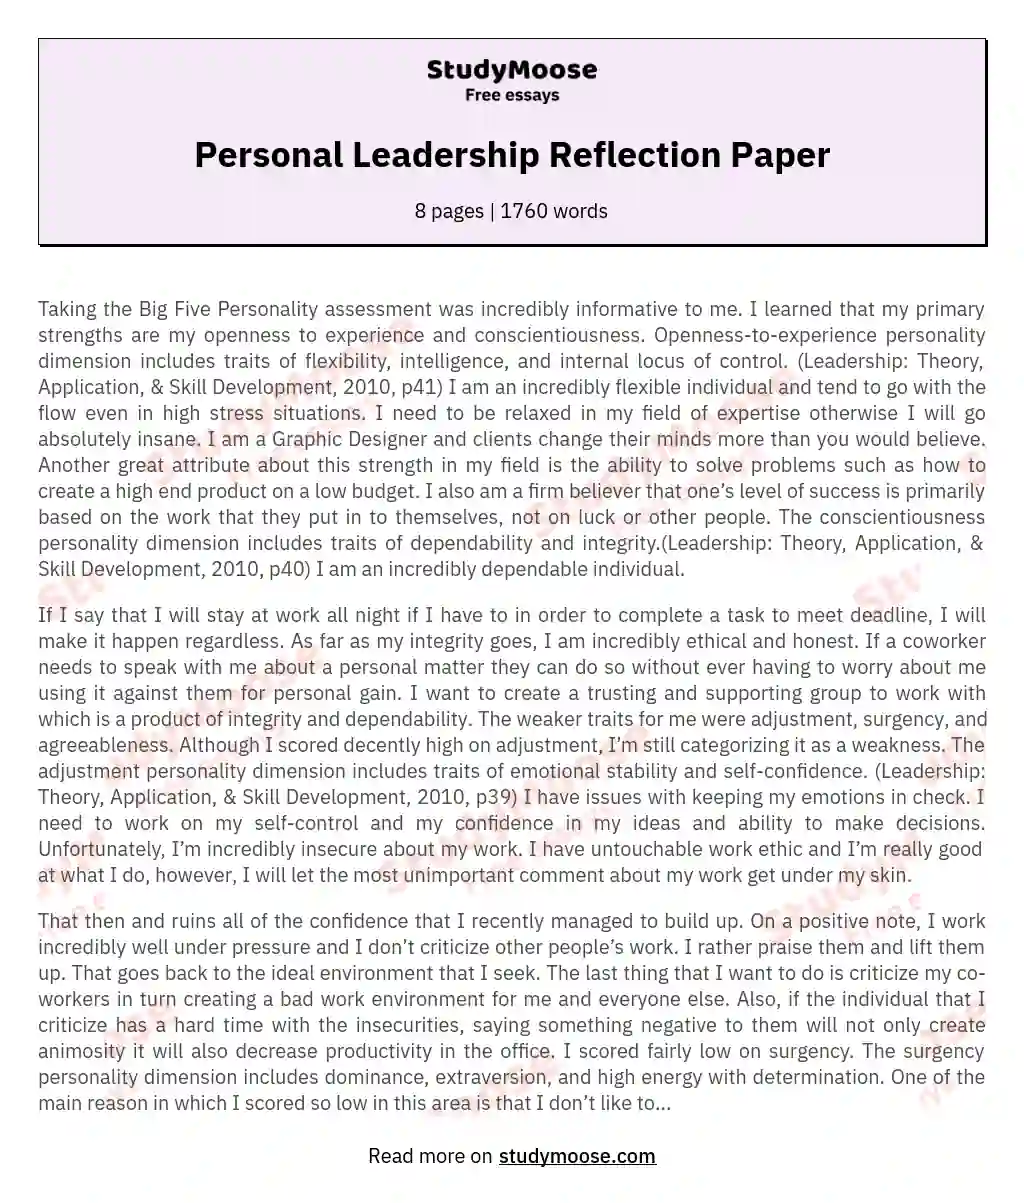 Personal Growth Through Personality Assessment and Leadership Reflection essay